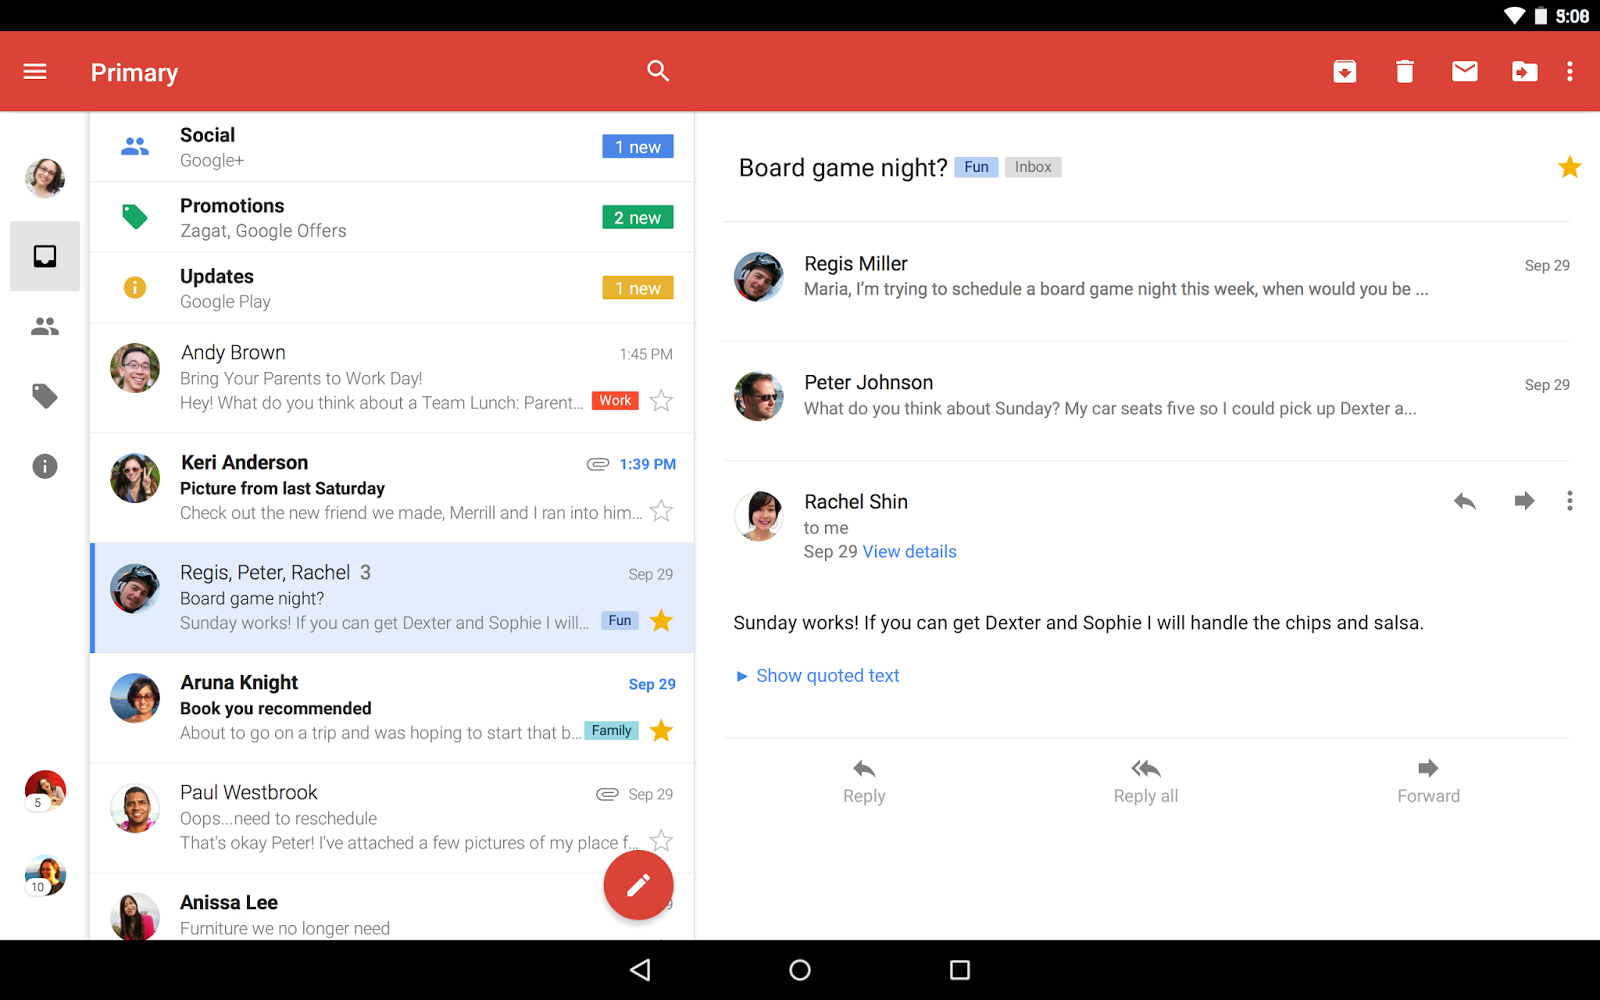 Gmail 5.0 with 'Material Design' and Multiple Email Account Support Now